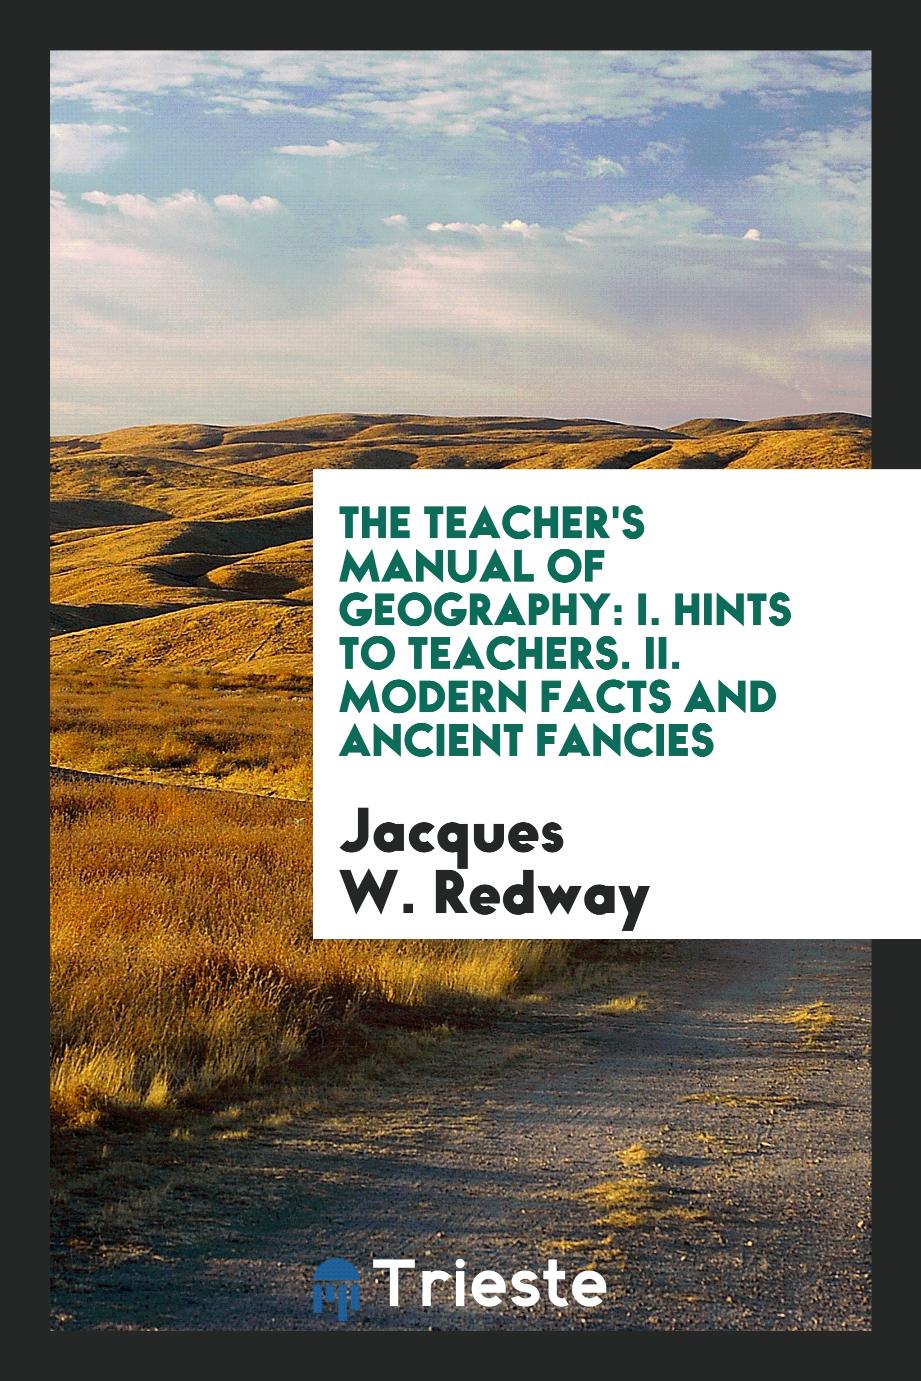 The Teacher's Manual of Geography: I. Hints to Teachers. II. Modern Facts and Ancient Fancies